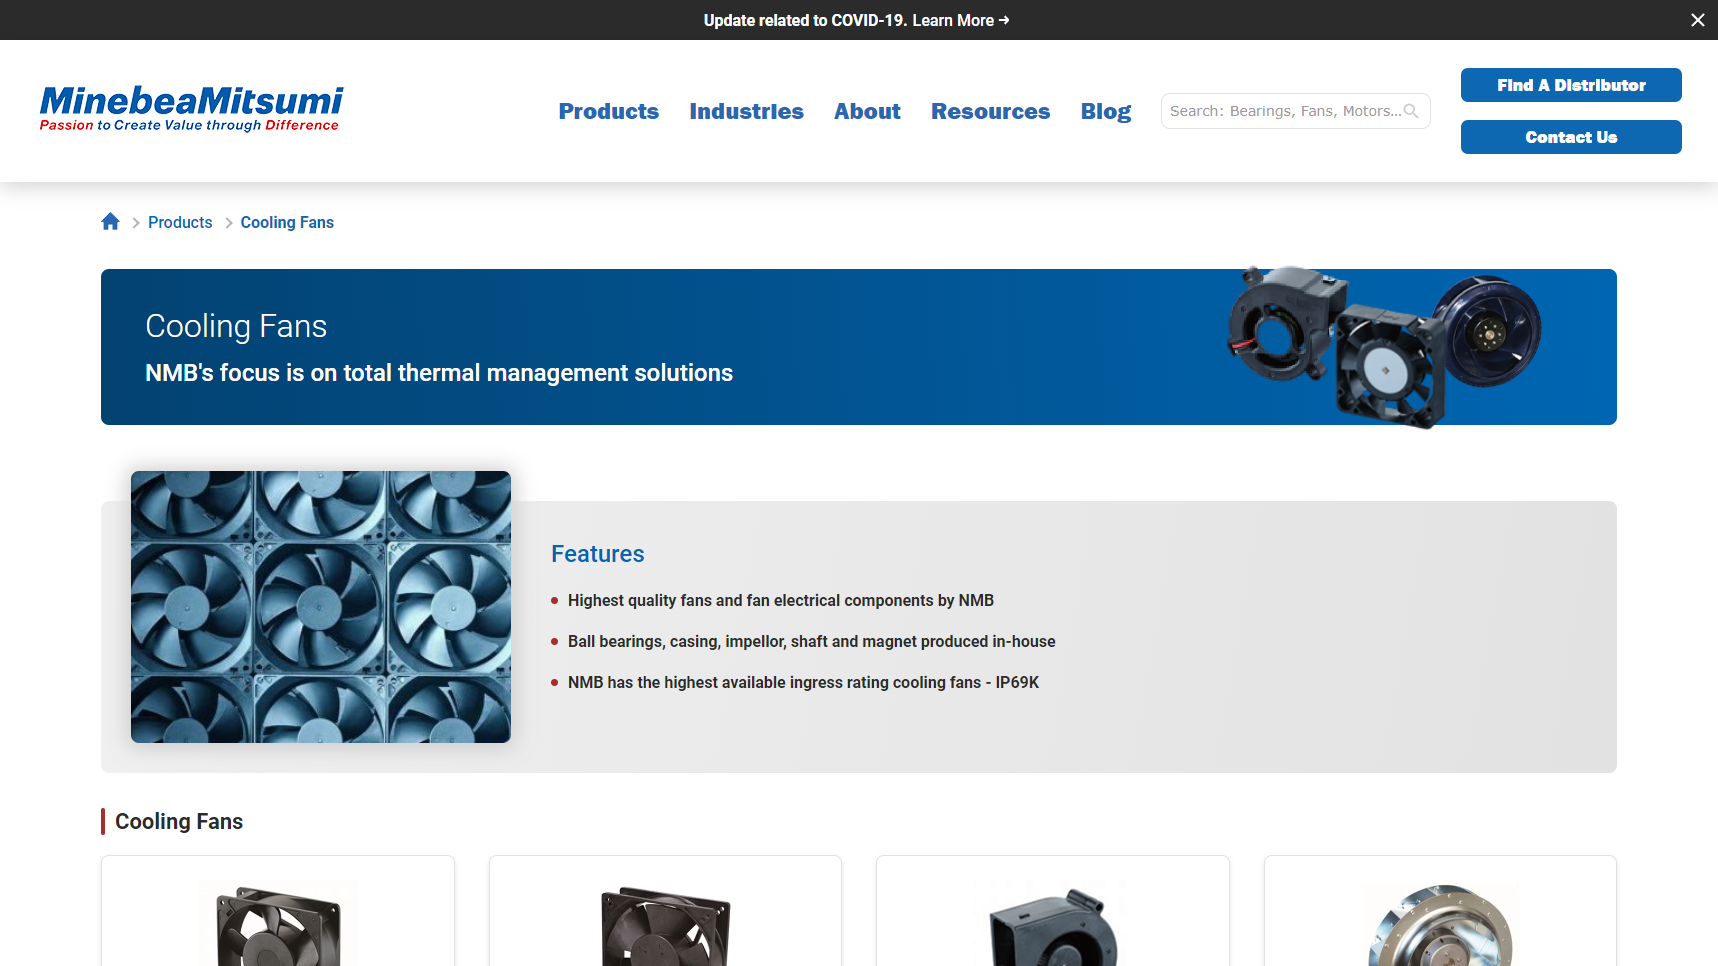 NMB Technologies Corporation - Cooling Fan Manufacturer